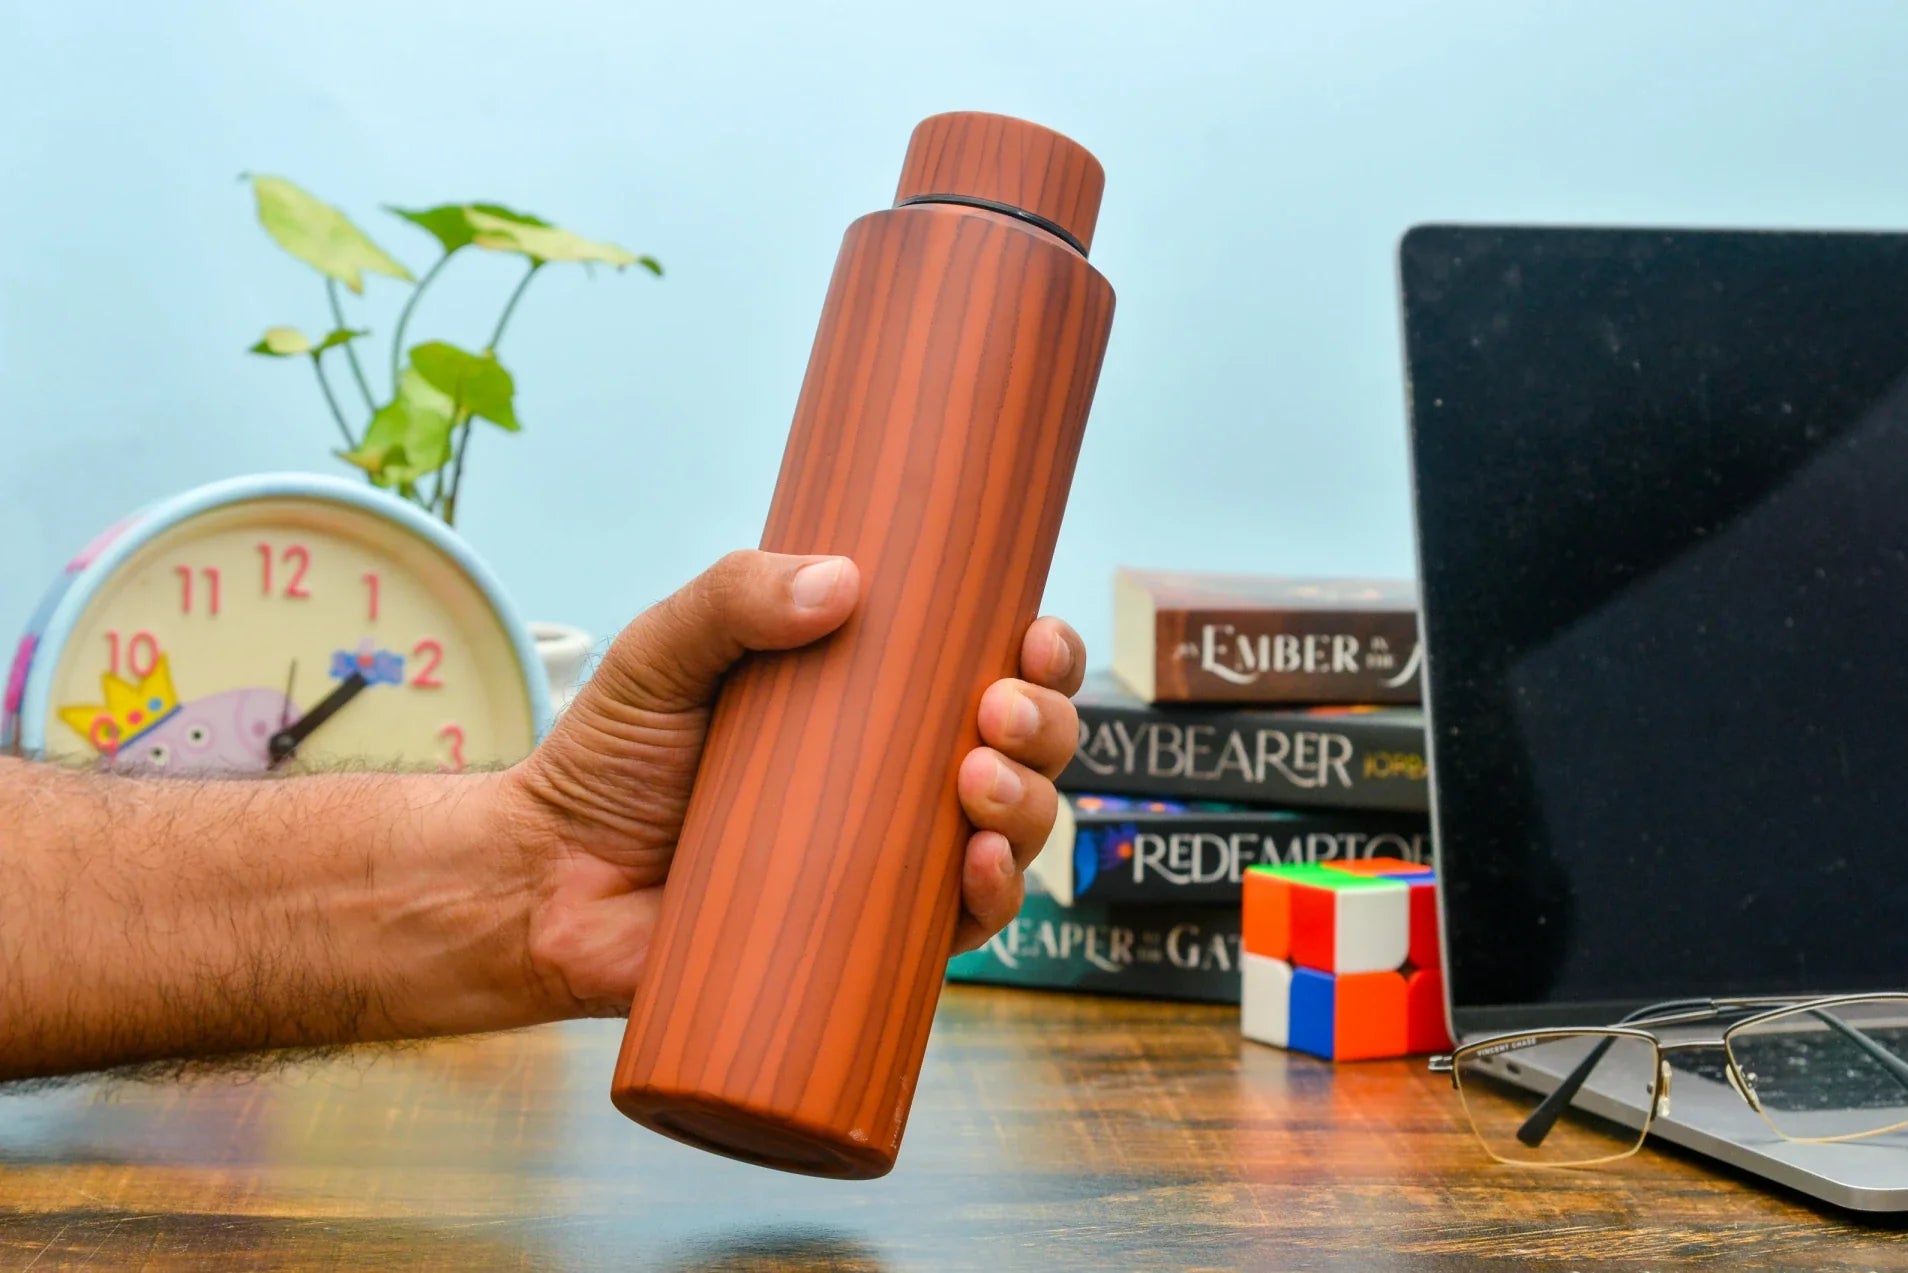 Get this brown wooden personalized bottle made from high quality stainless steel to carry lie juices and drinks safely